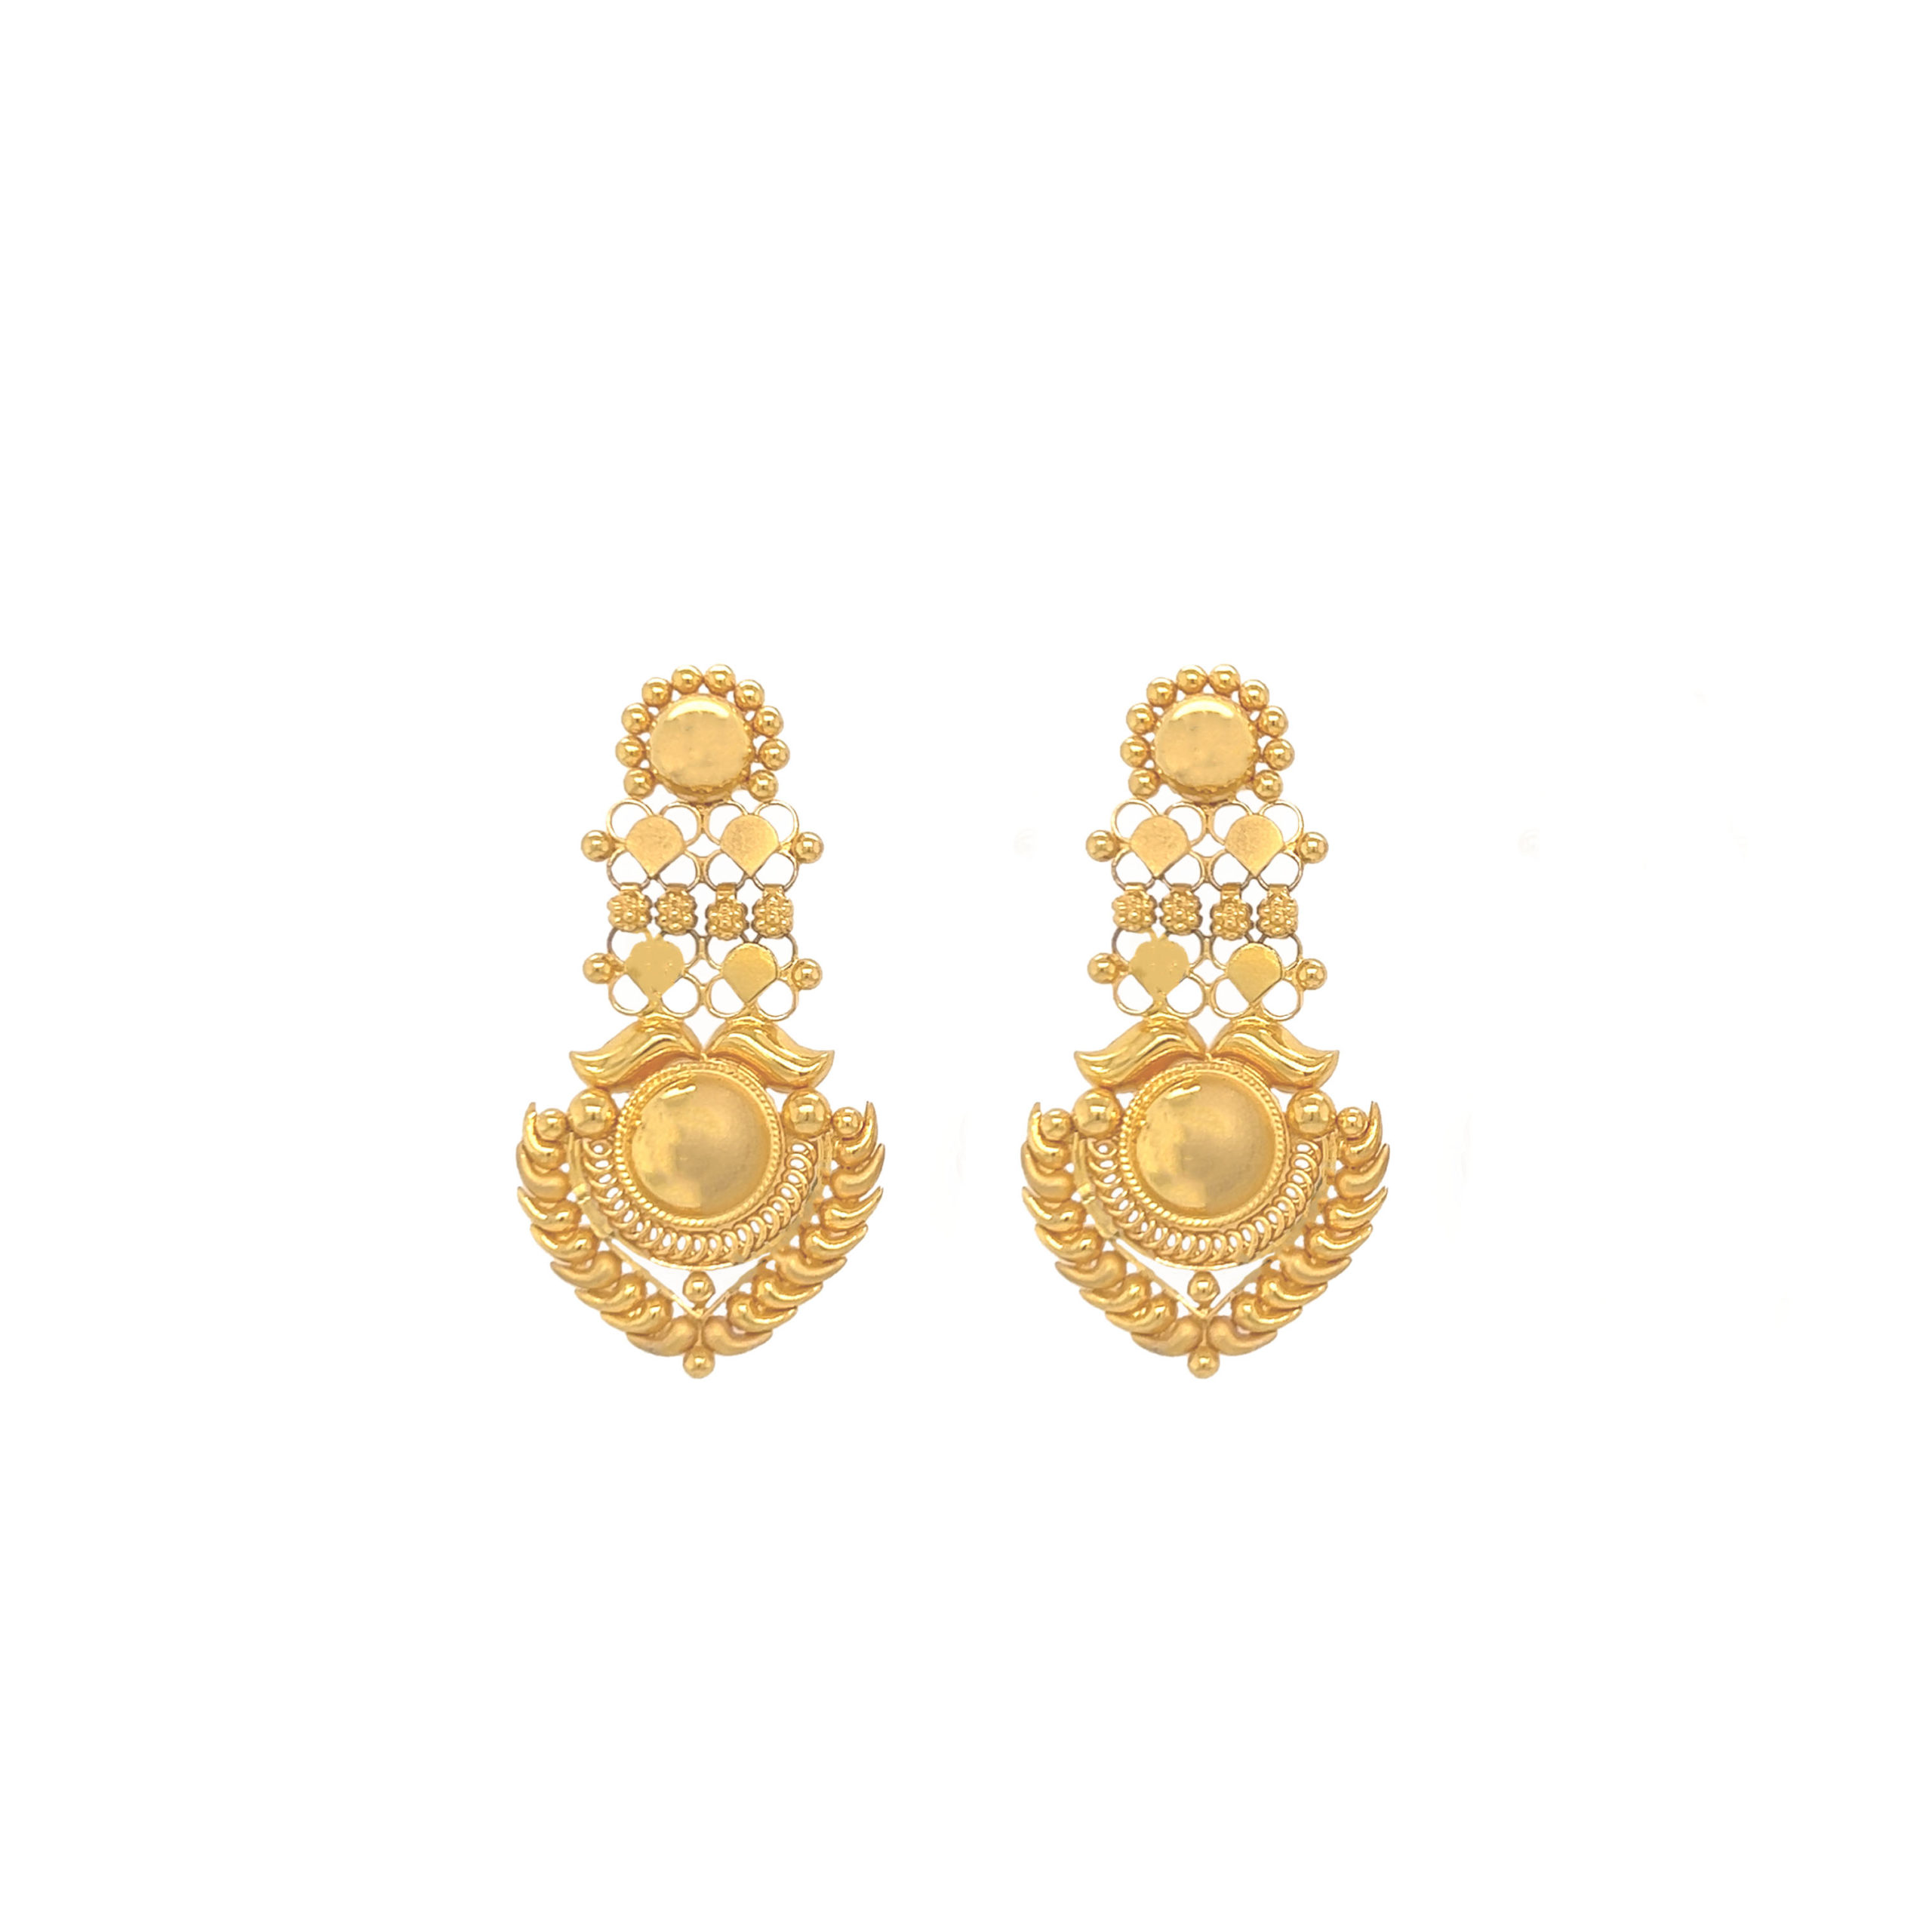 See Gold Earring Designs of 2023